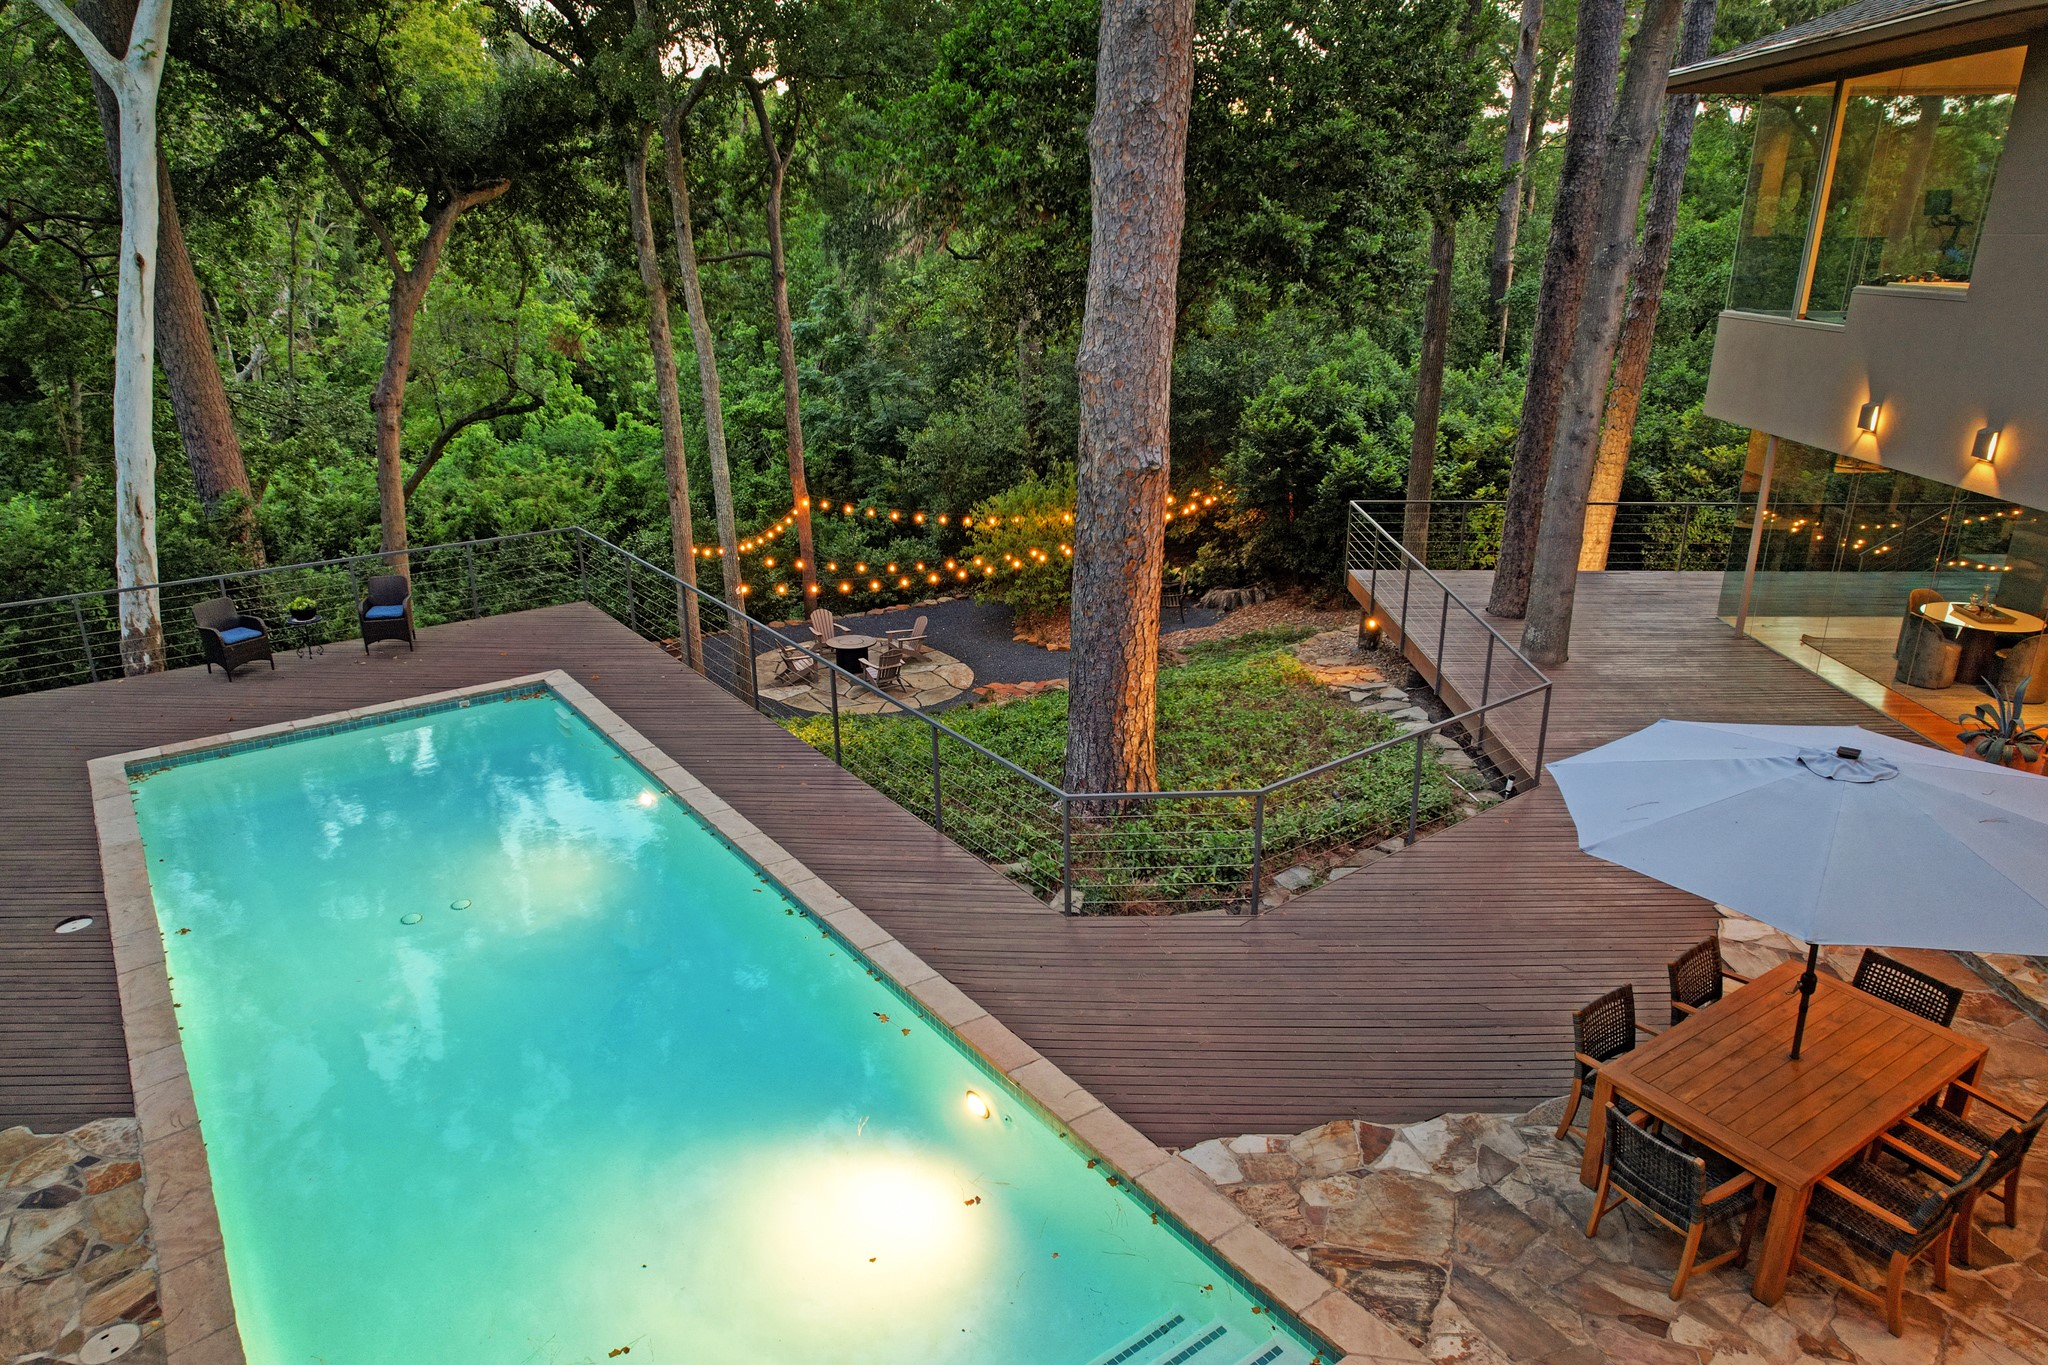 Alluring outdoor spaces are showcased with its multiple entertaining tranquil areas.